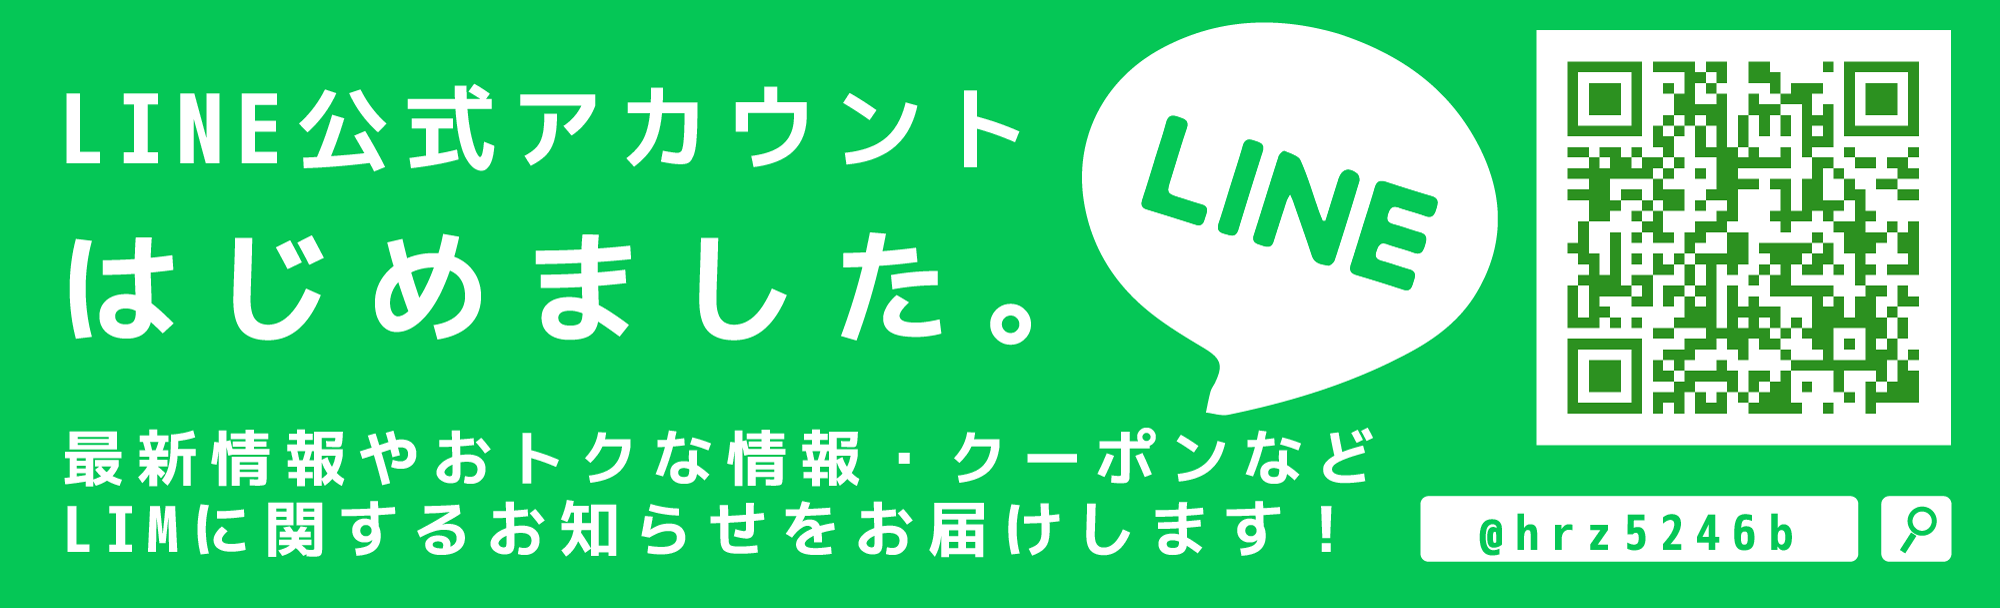 lim-lineopen.png